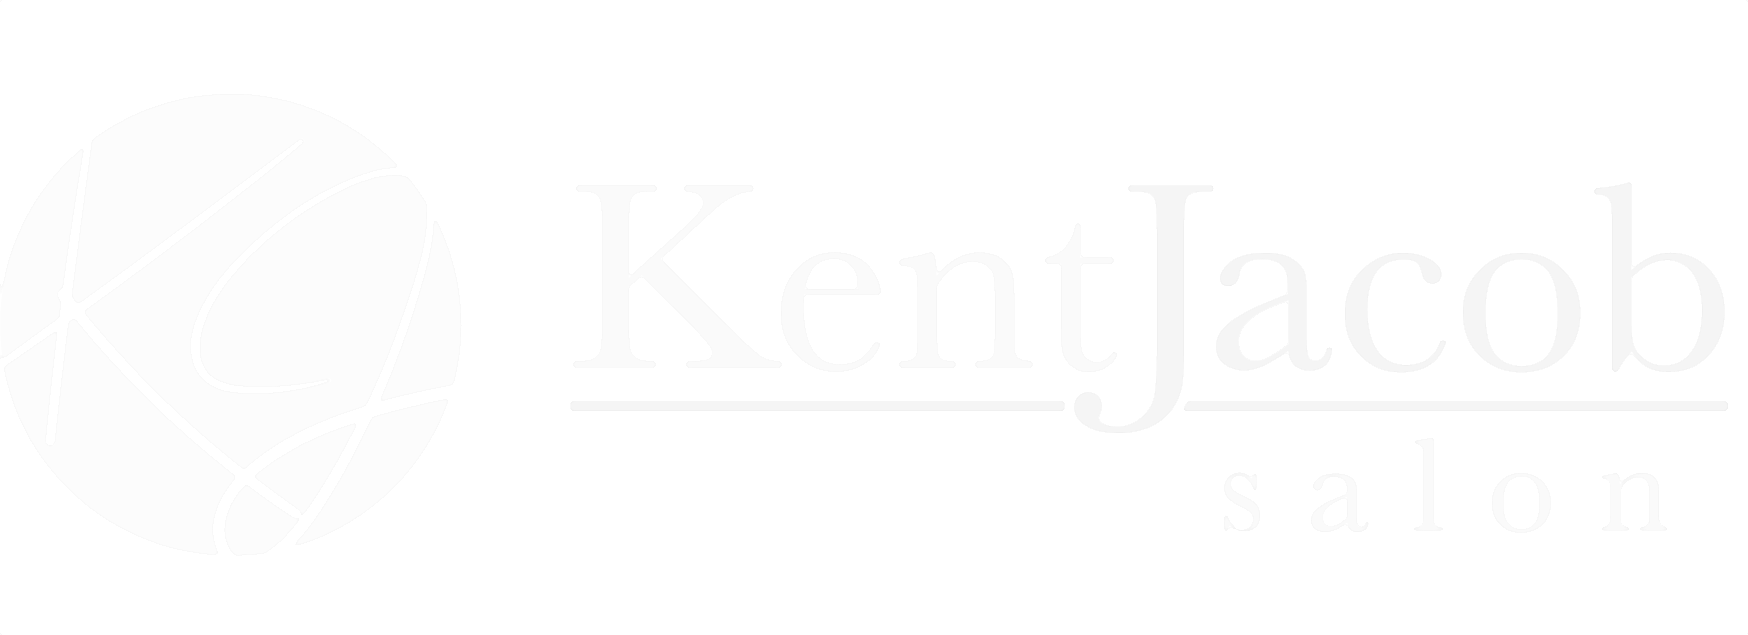 This is a white version of the Kent Jacob Salon logo.